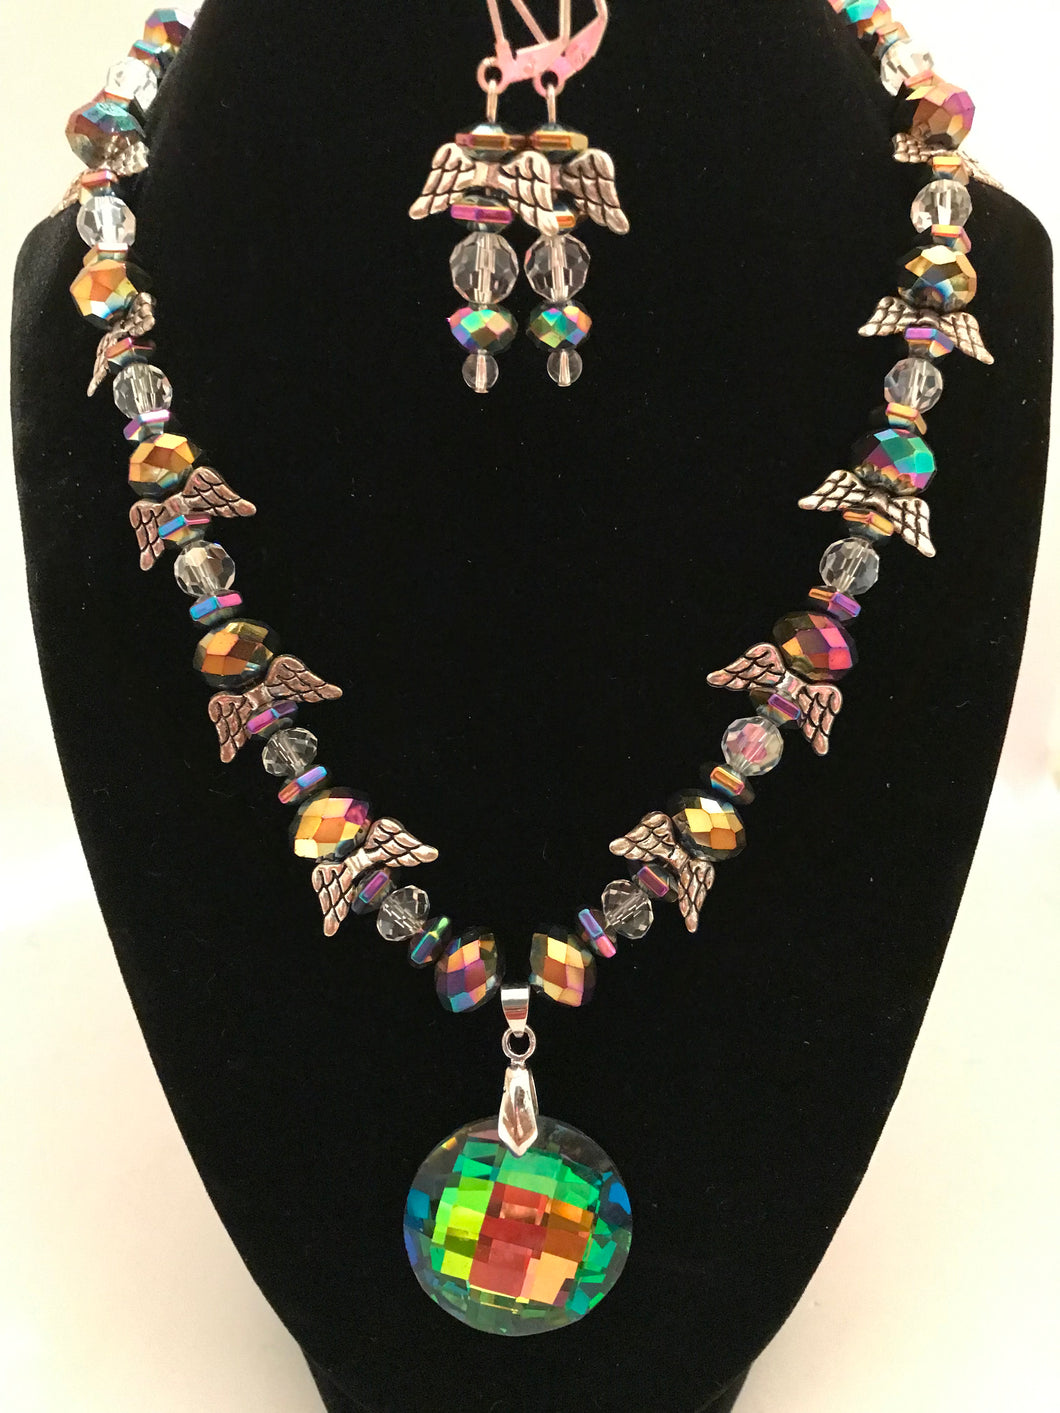 Irridescent multi-color round pendant and rainbow glass beads with angel charms and matching earrings